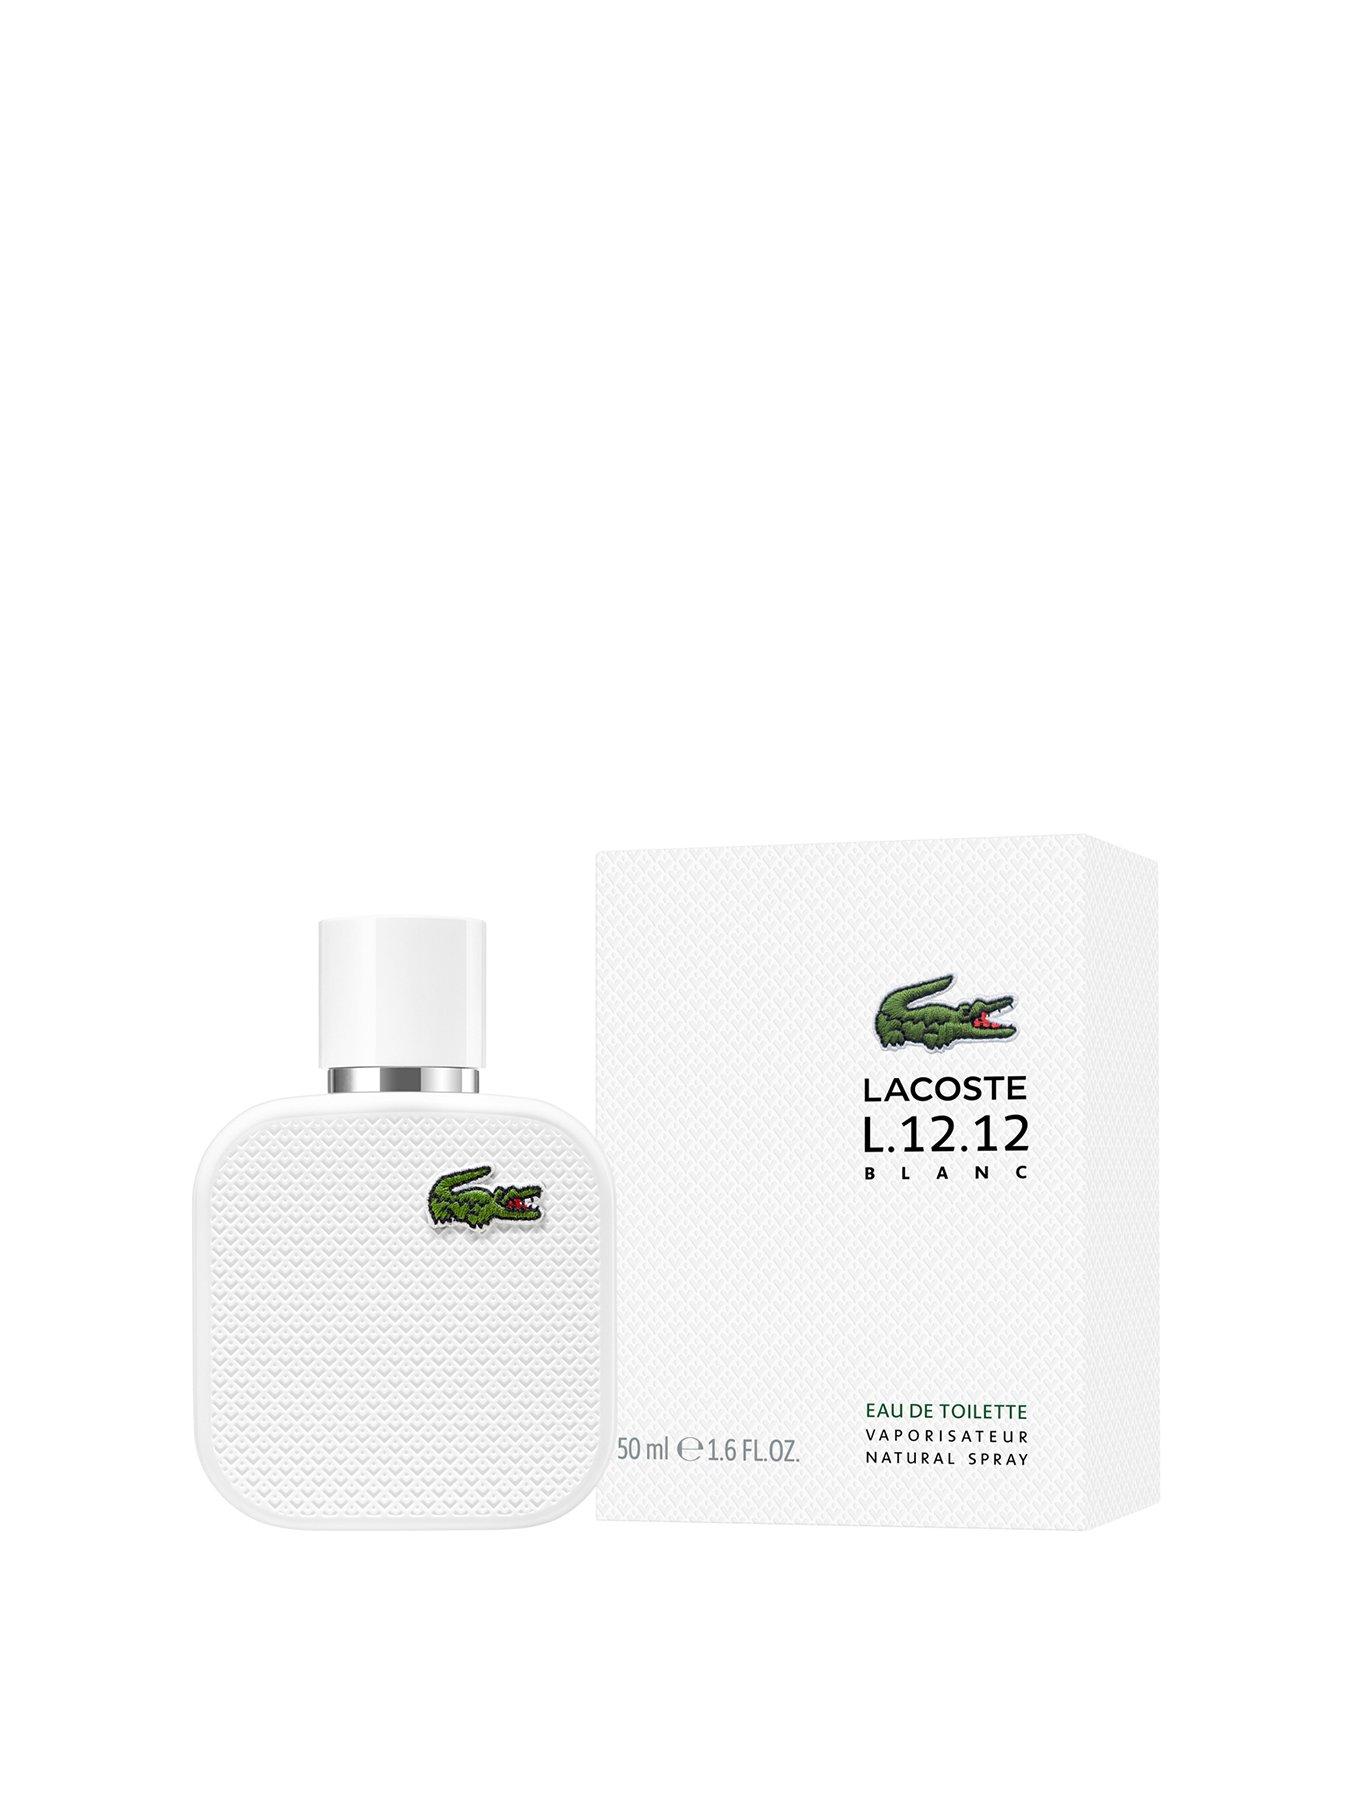 lacoste blanc 175ml boots